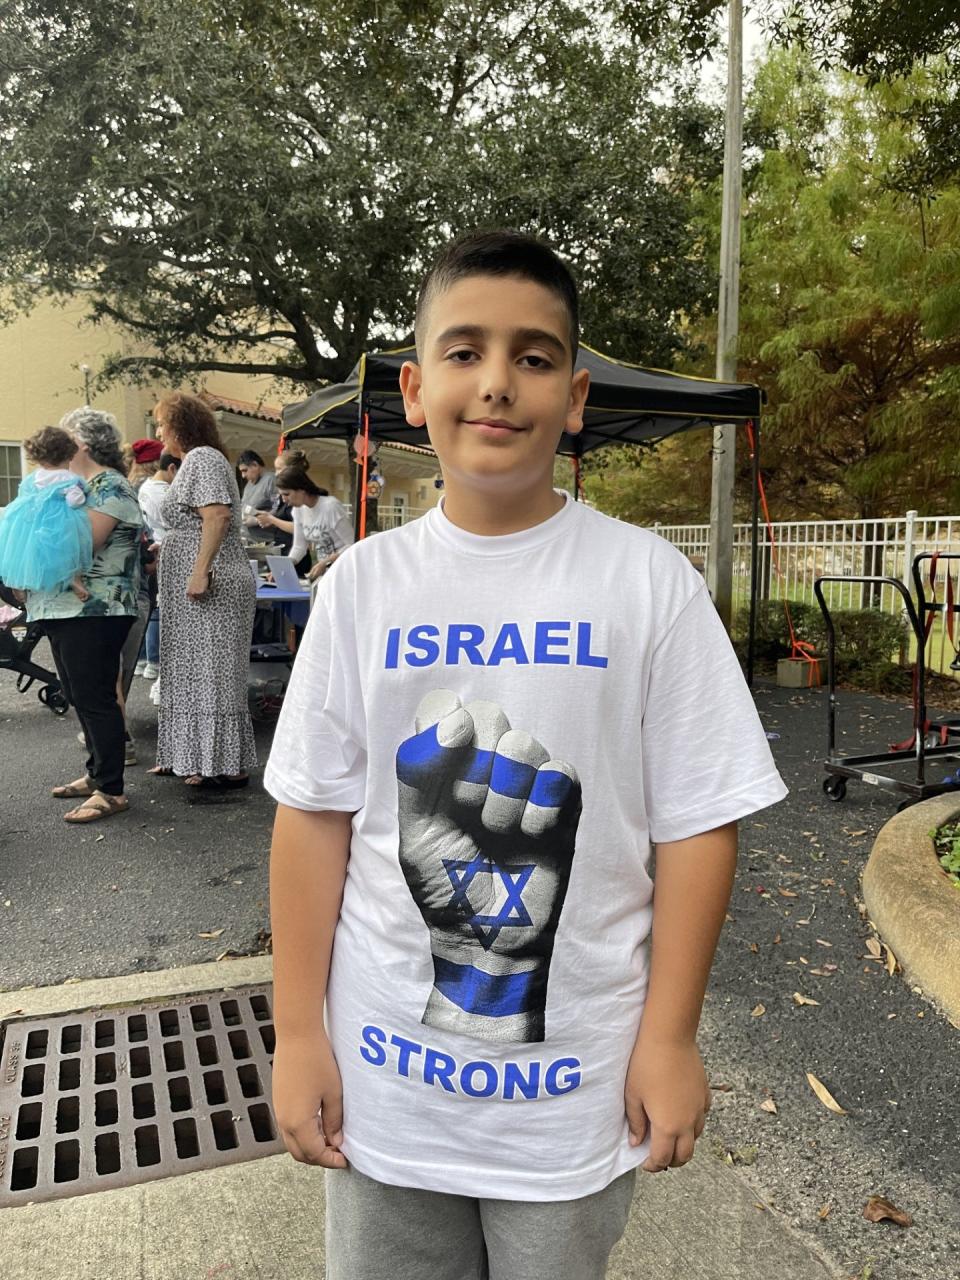 Jonathan Chen, 8, and his mother, Shani Chen, arrived in Ormond Beach a month ago from Rishon Le Zion, Israel. On Sunday, he showed support for his country at a celebration of Hanukkah at the Chabad Lubavitch of Greater Daytona Beach.